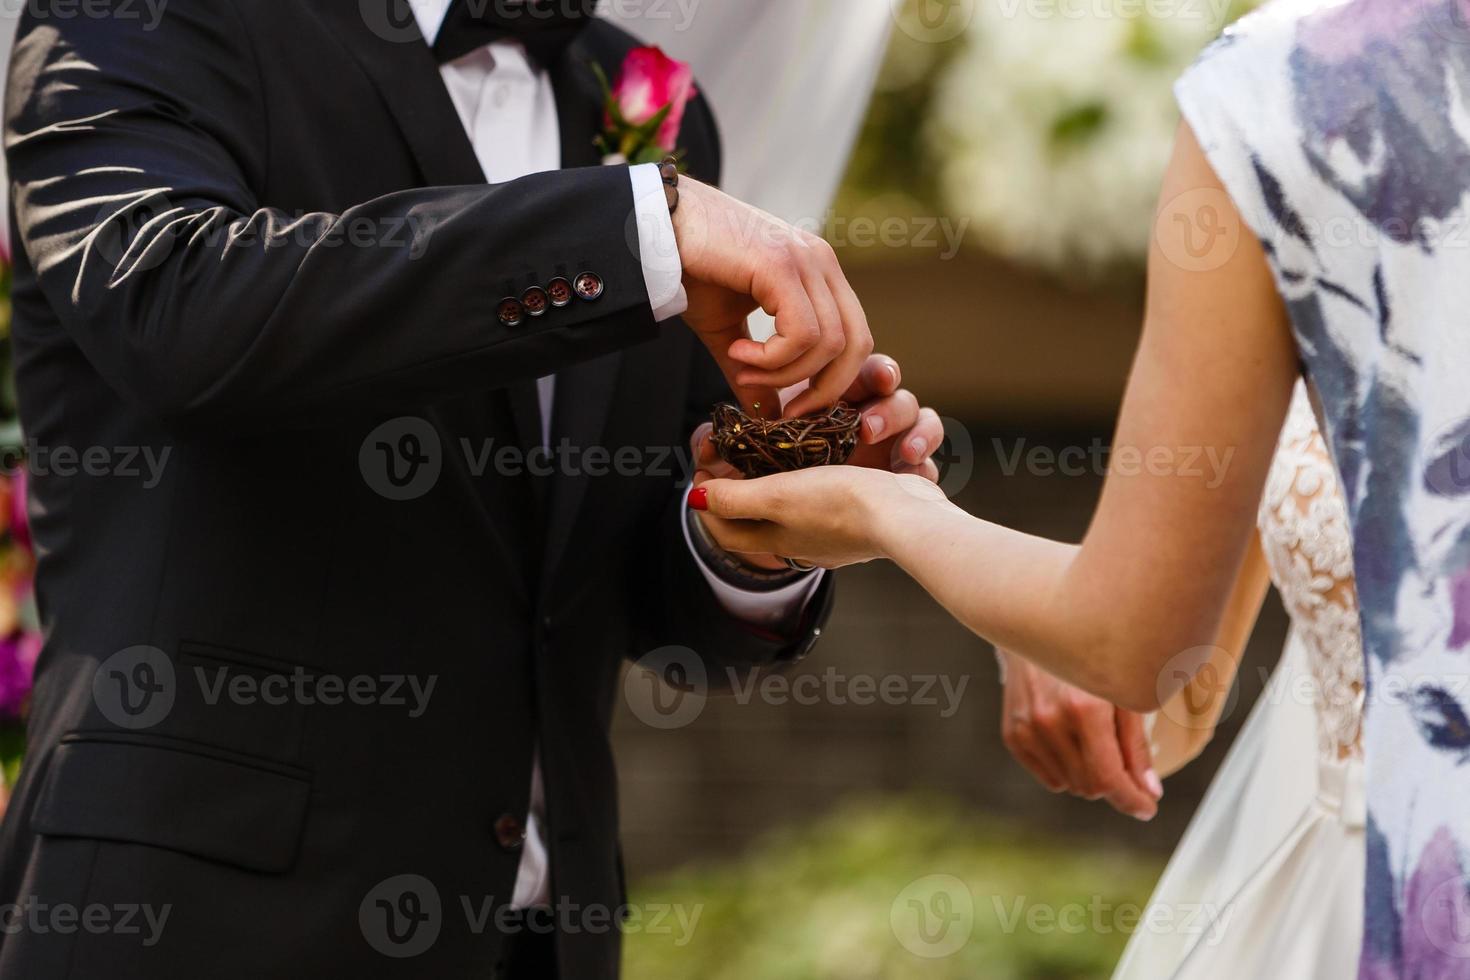 The bride and groom exchange rings during a wedding ceremony, a wedding in the summer garden photo